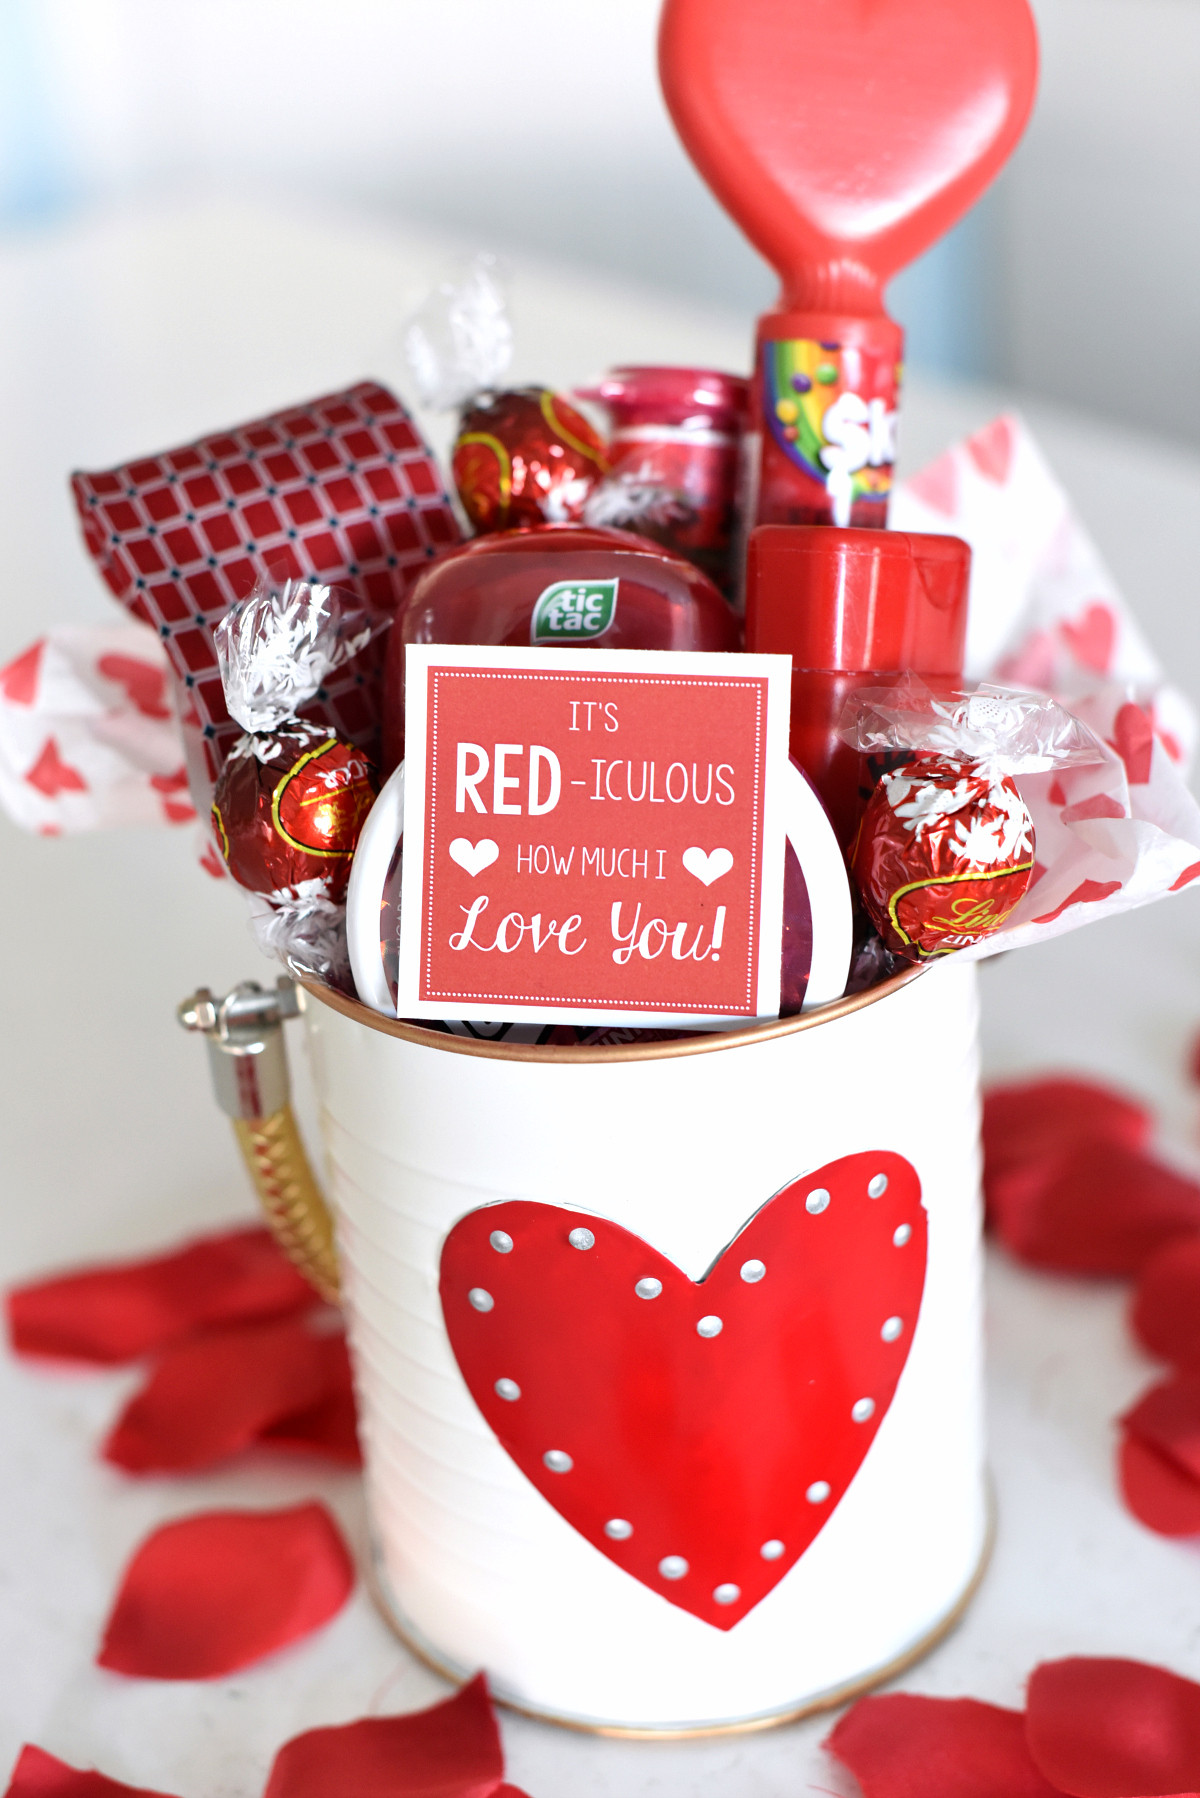 Gift Ideas For Her Valentines
 25 DIY Valentine s Day Gift Ideas Teens Will Love